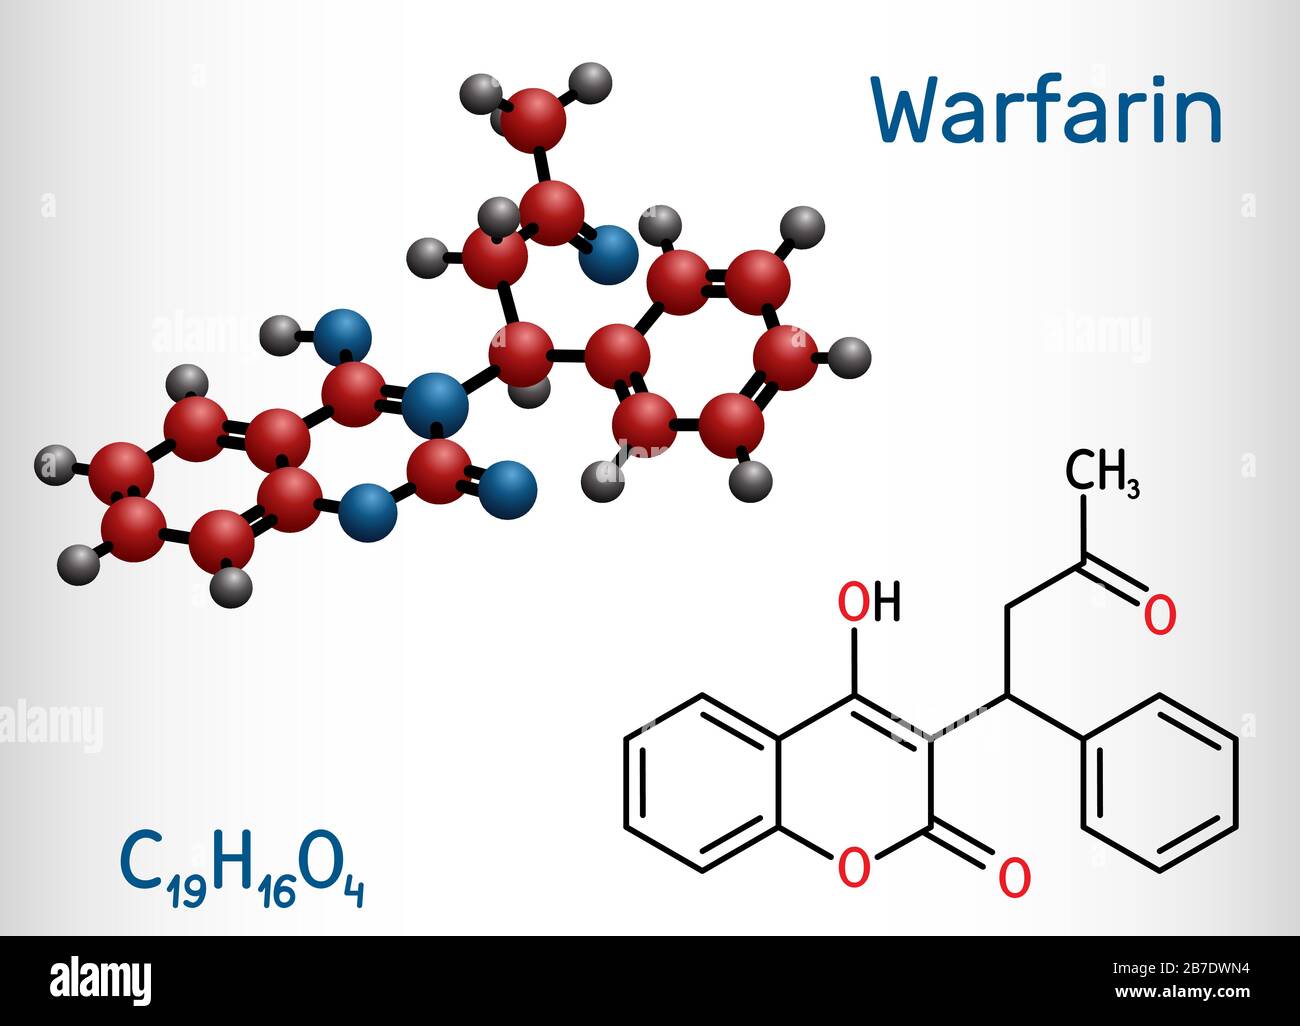 Warfarin, C19H16O4 molecule. Warfarin is an anticoagulant drug normally used to prevent blood clot formation. Structural chemical formula and molecule Stock Vector